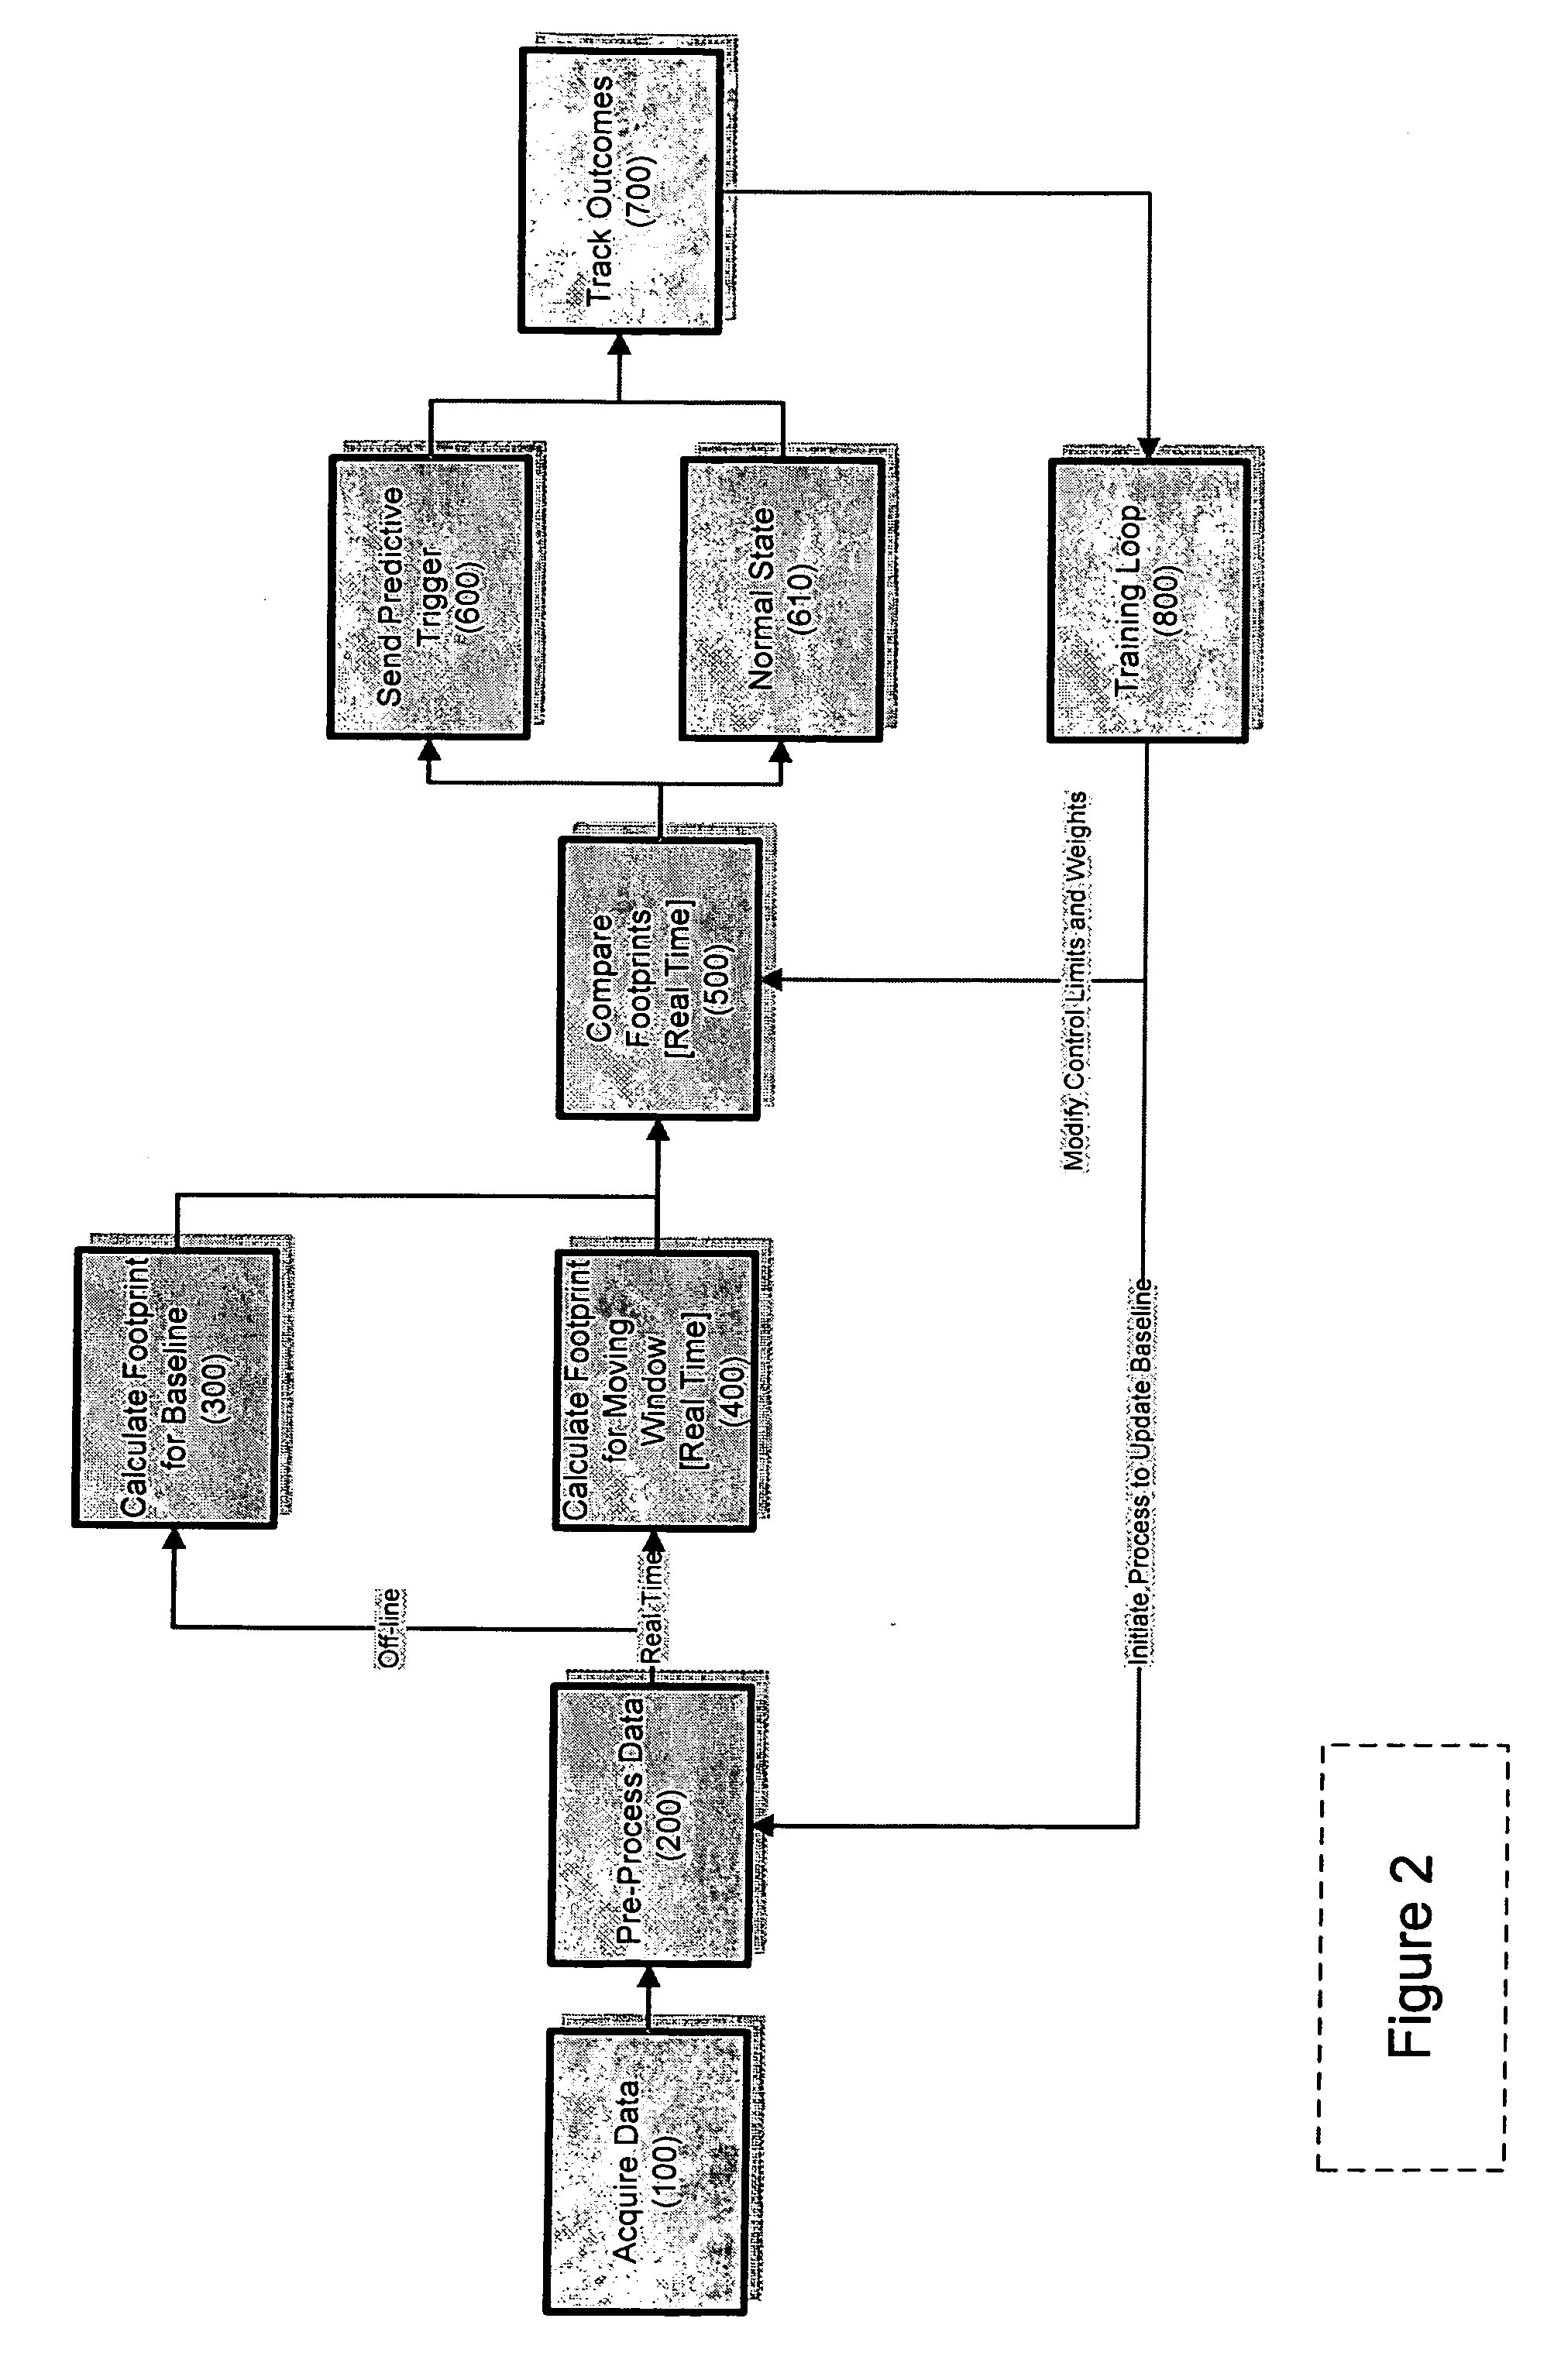 Method for using statistical analysis to monitor and analyze performance of new network infrastructure or software applications for deployment thereof